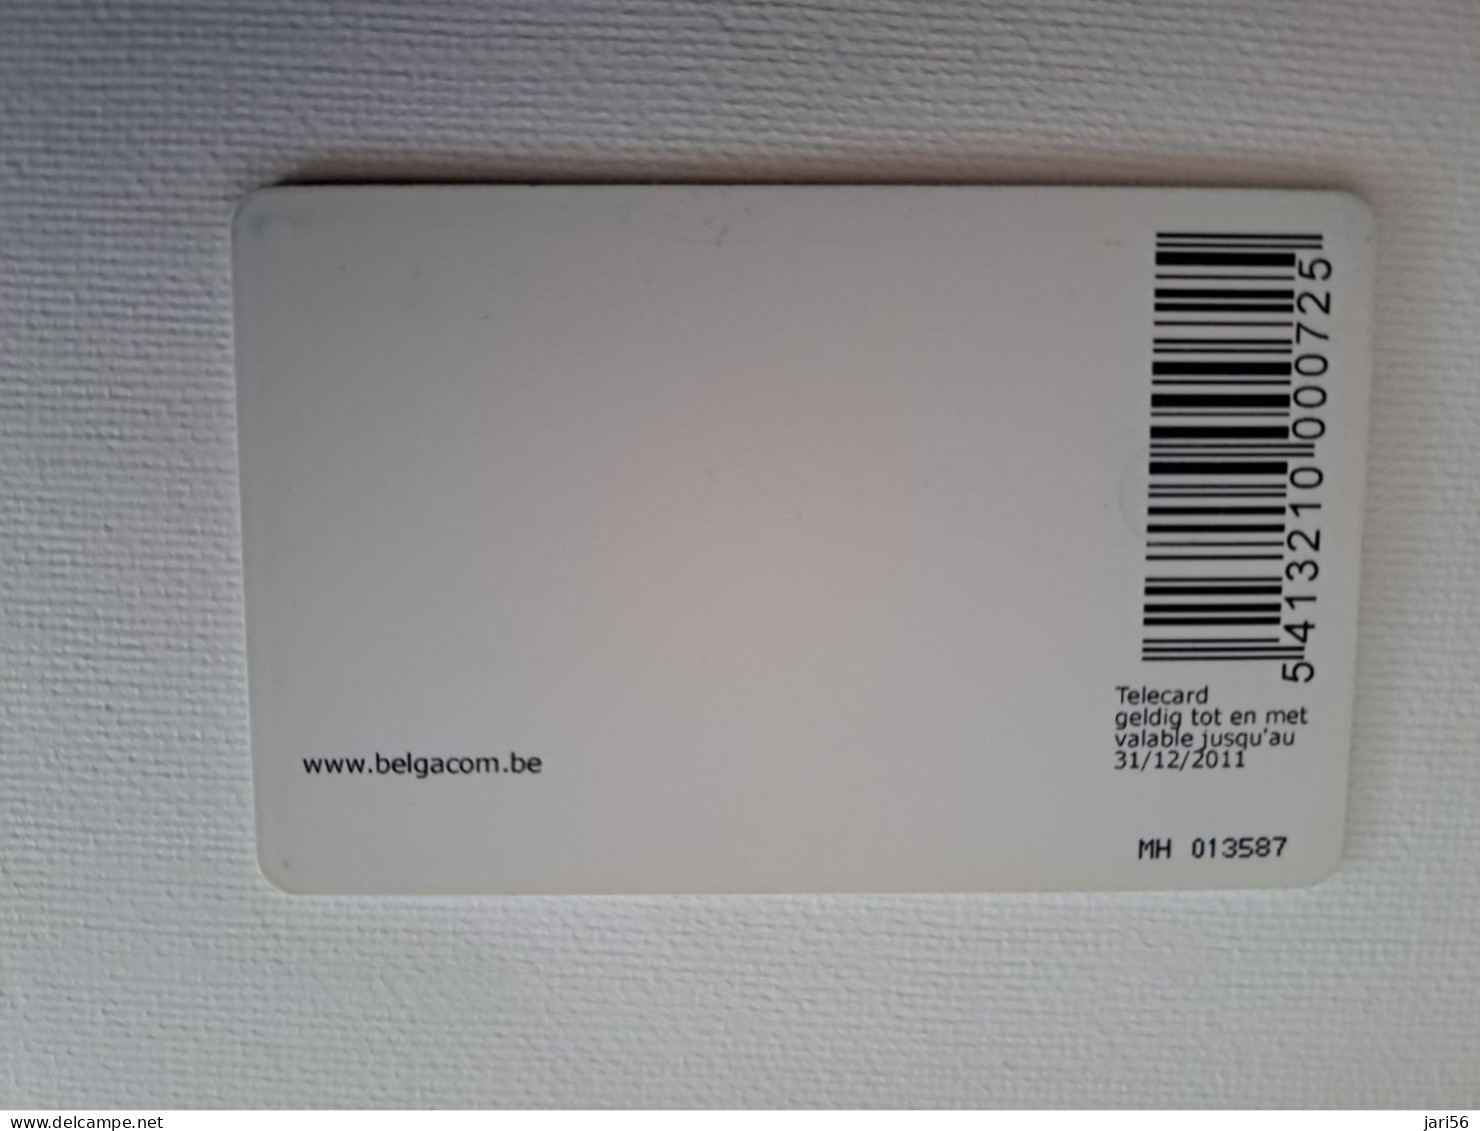 BELGIUM   CHIP/ CARD / € 10,- / INT POLAR FOUNDATION    / USED  CARD     ** 16579** - Without Chip